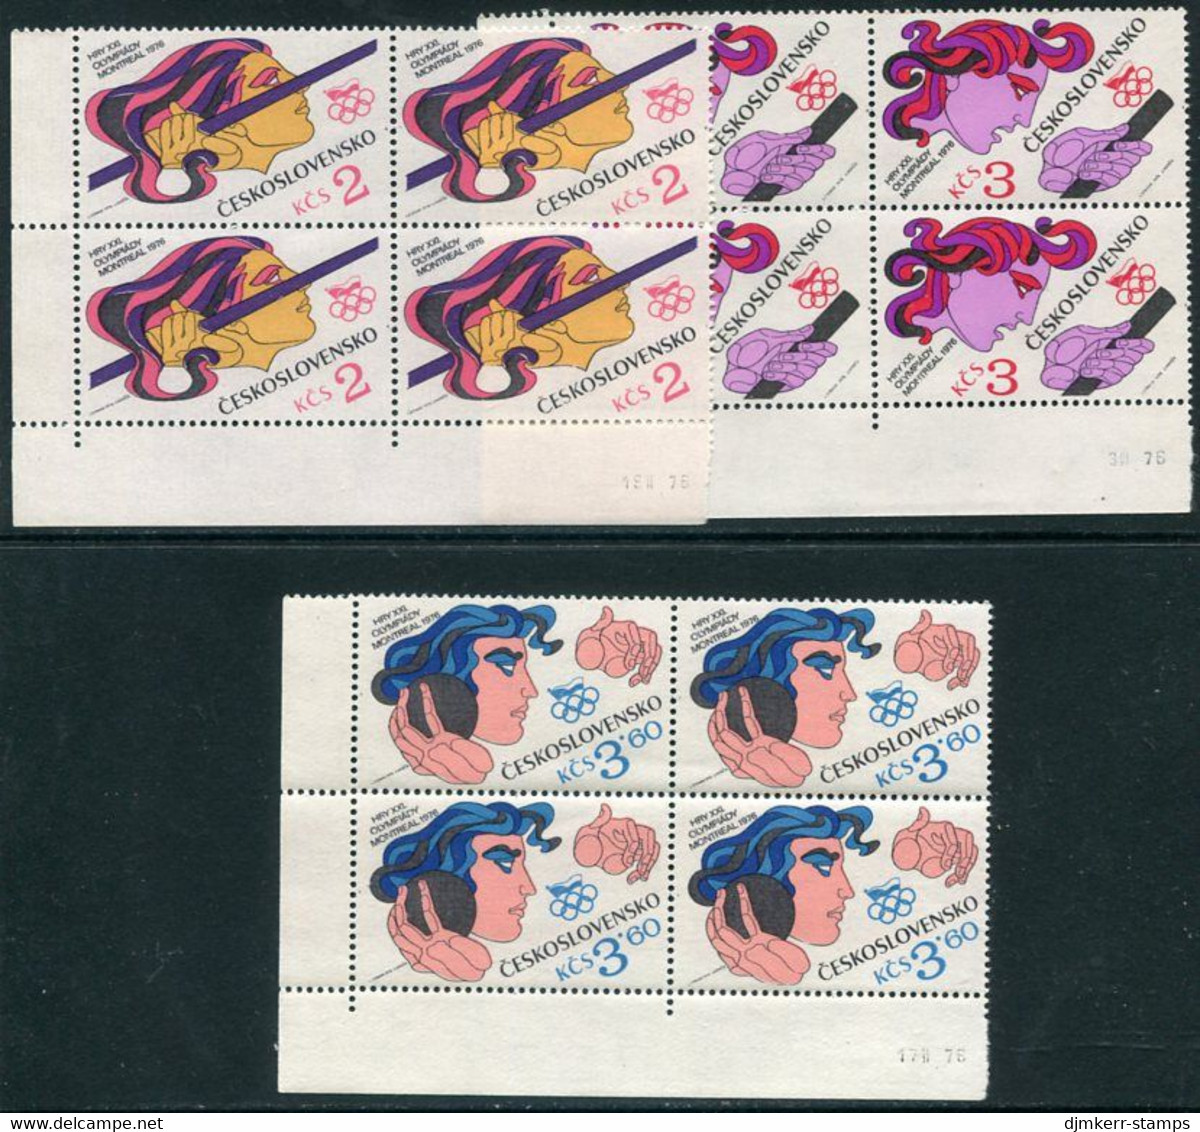 CZECHOSLOVAKIA 1976 Olympic Games, Montreal Blocks Of 4 MNH / **. Michel 2308-10 - Unused Stamps